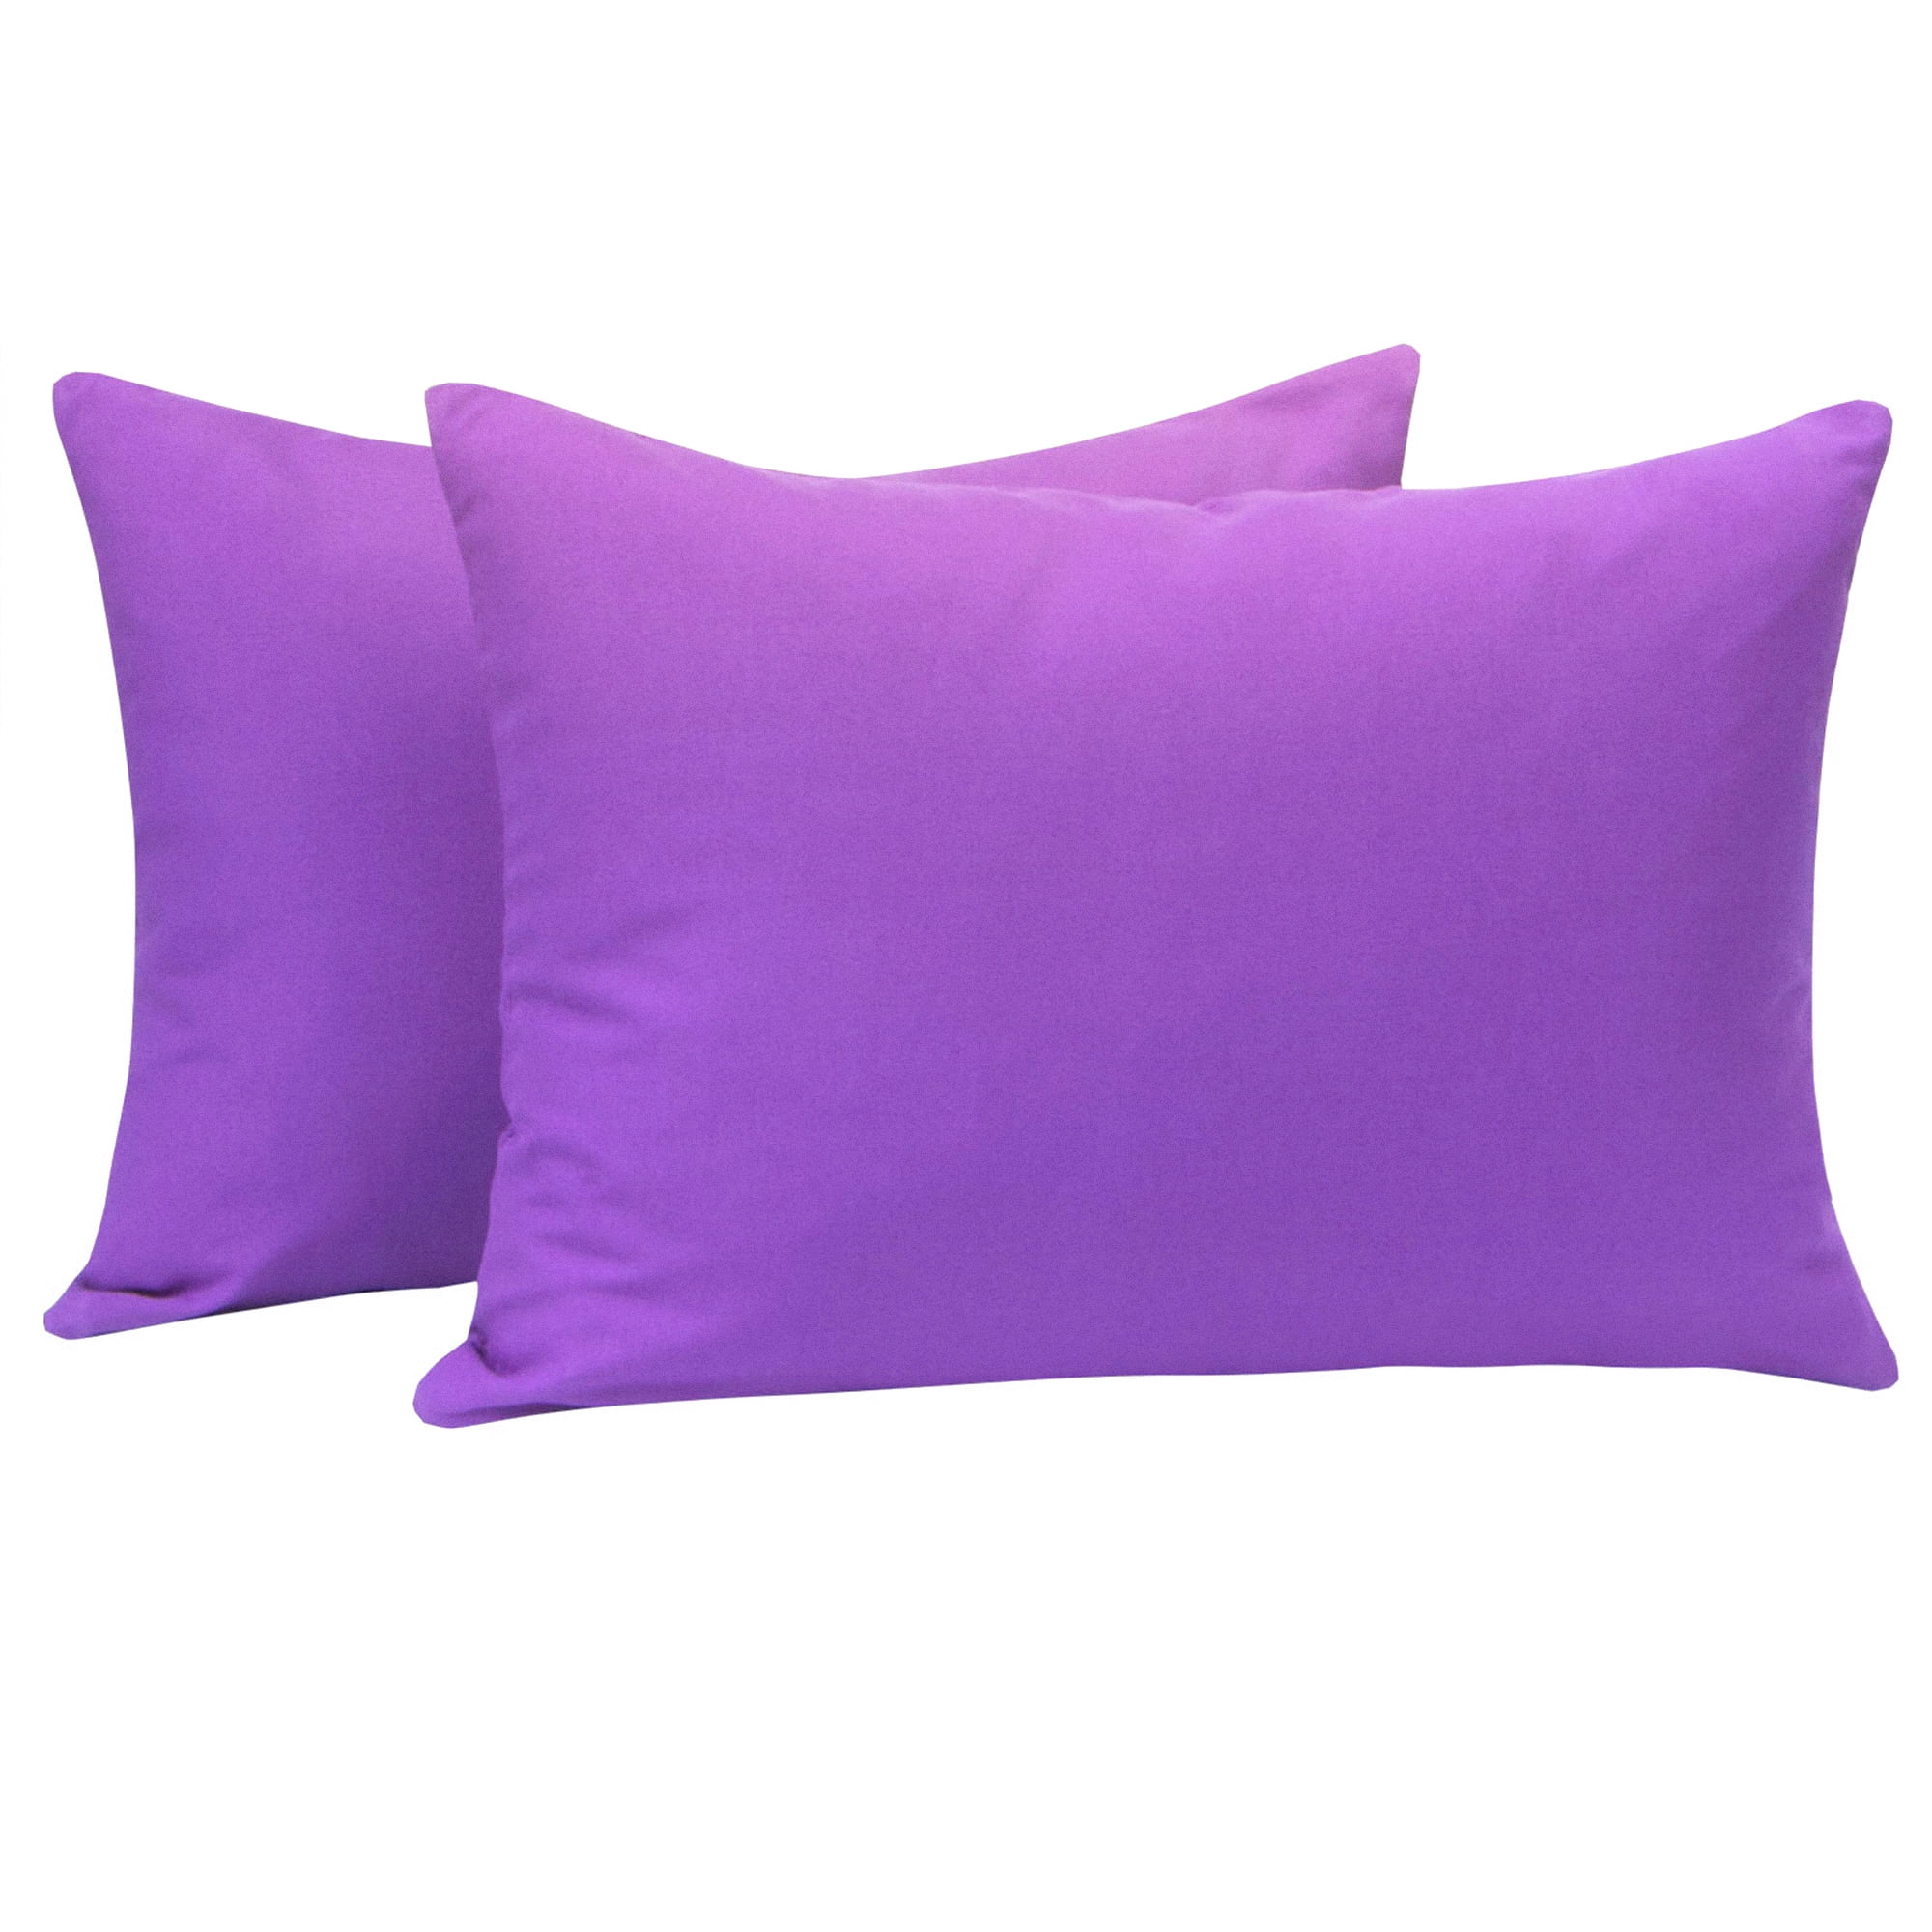 Ntbay soft anti-wrinkle cushion covers and dirt-repellent envelope closures microfiber plain pillowcases 